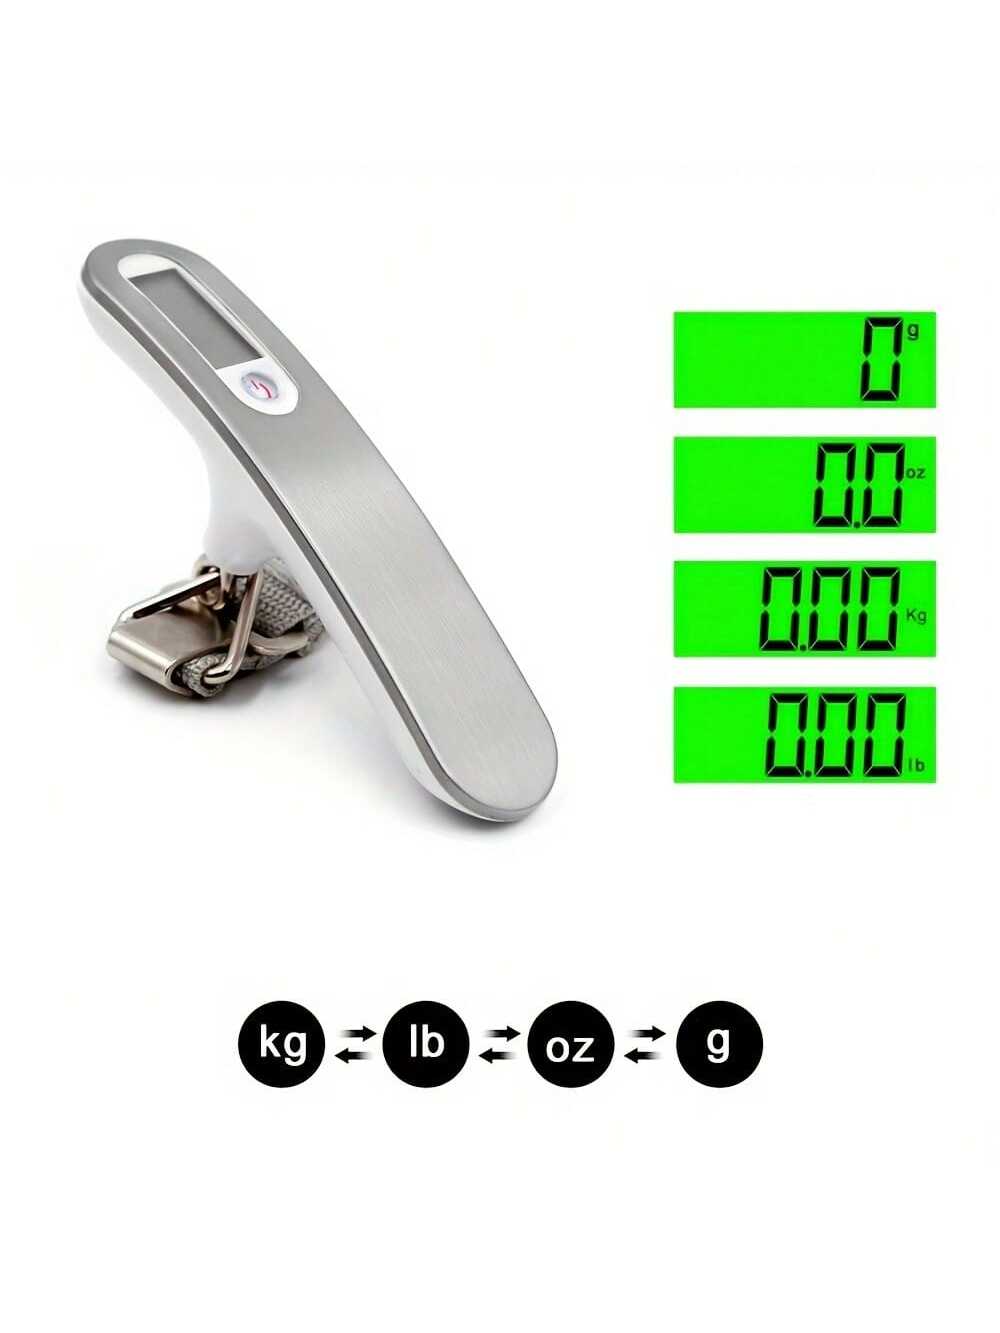 1pc Electronic Portable Luggage Scale For Weight Measurement Of Travel Bags Or Other Items - 50kg Capacity, Stainless Steel, With Strap And Backlit Display, Switchable Between Kg/lb, Powered By Cr2032 Battery - Great Christmas Gift-White-2